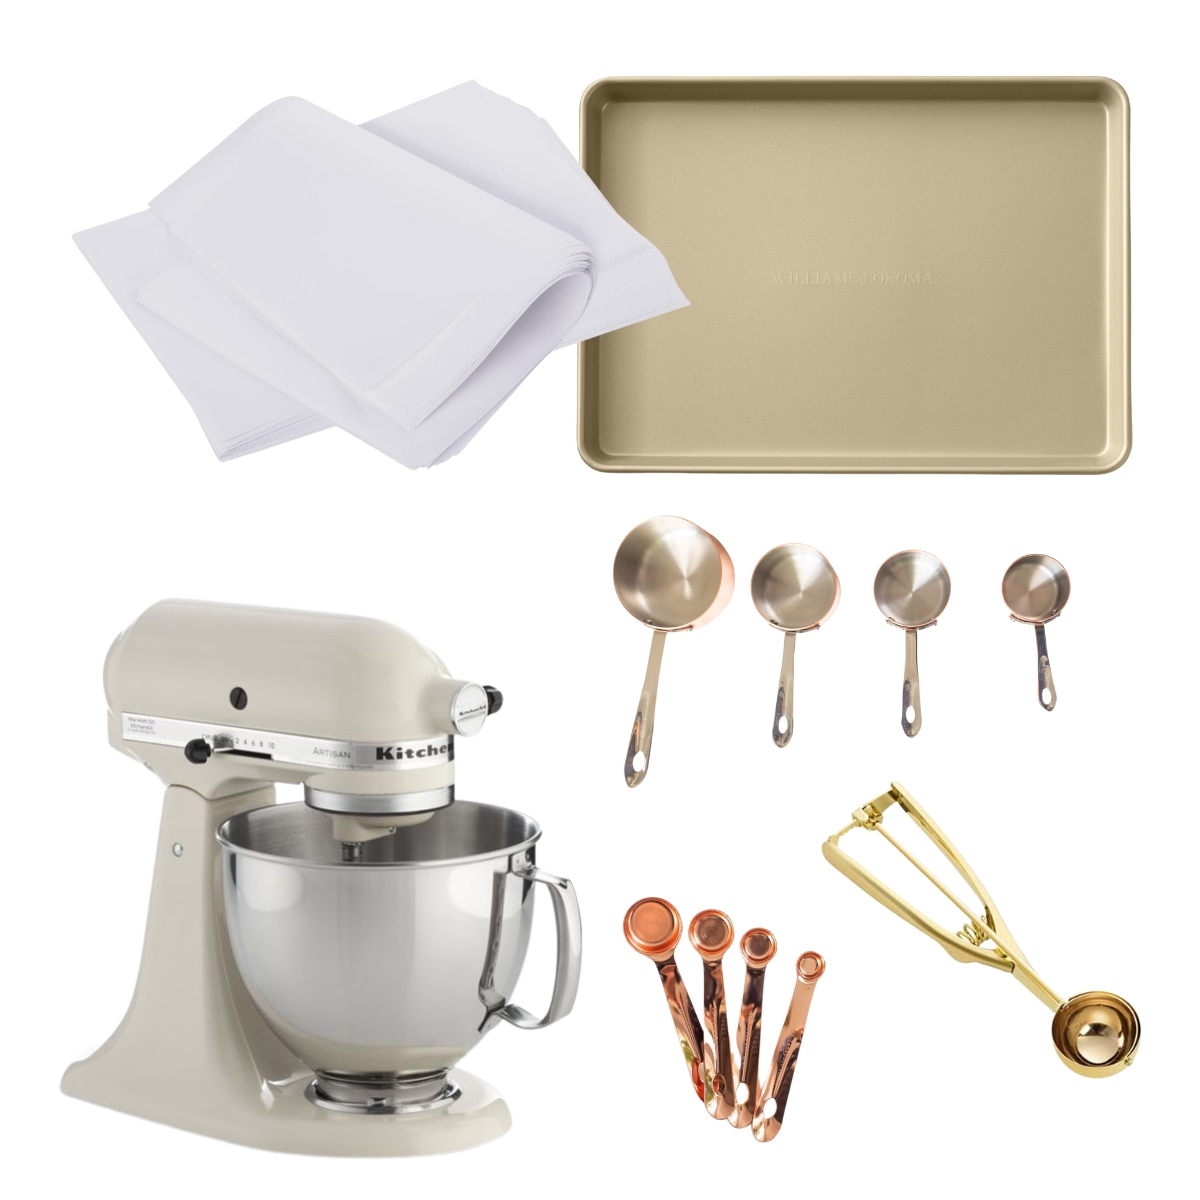 A kitchenaid mixer is shown, along with spoons and utensils used for baking toffee cookies.